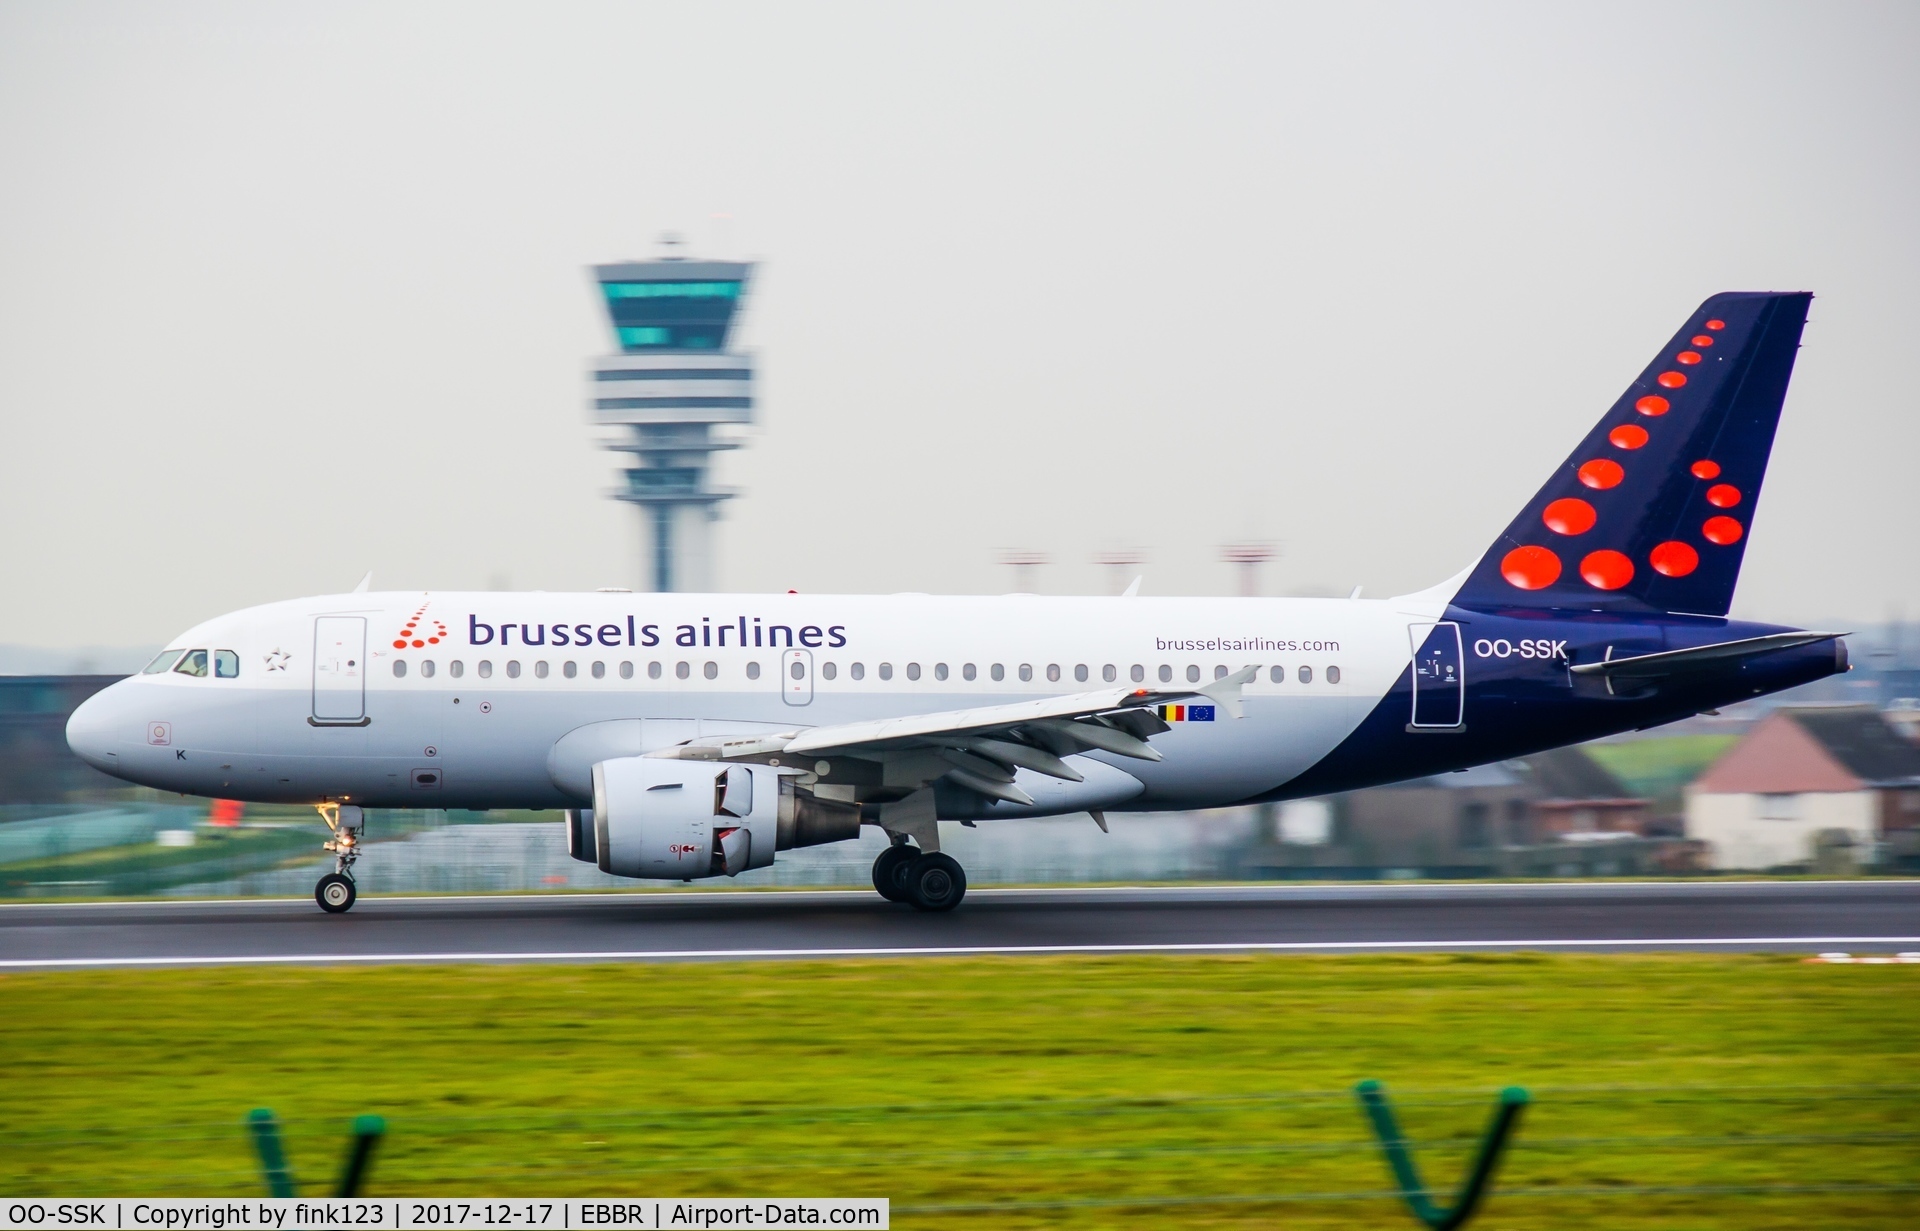 OO-SSK, 2000 Airbus A319-112 C/N 1336, Brussel airlines 319 slwong down